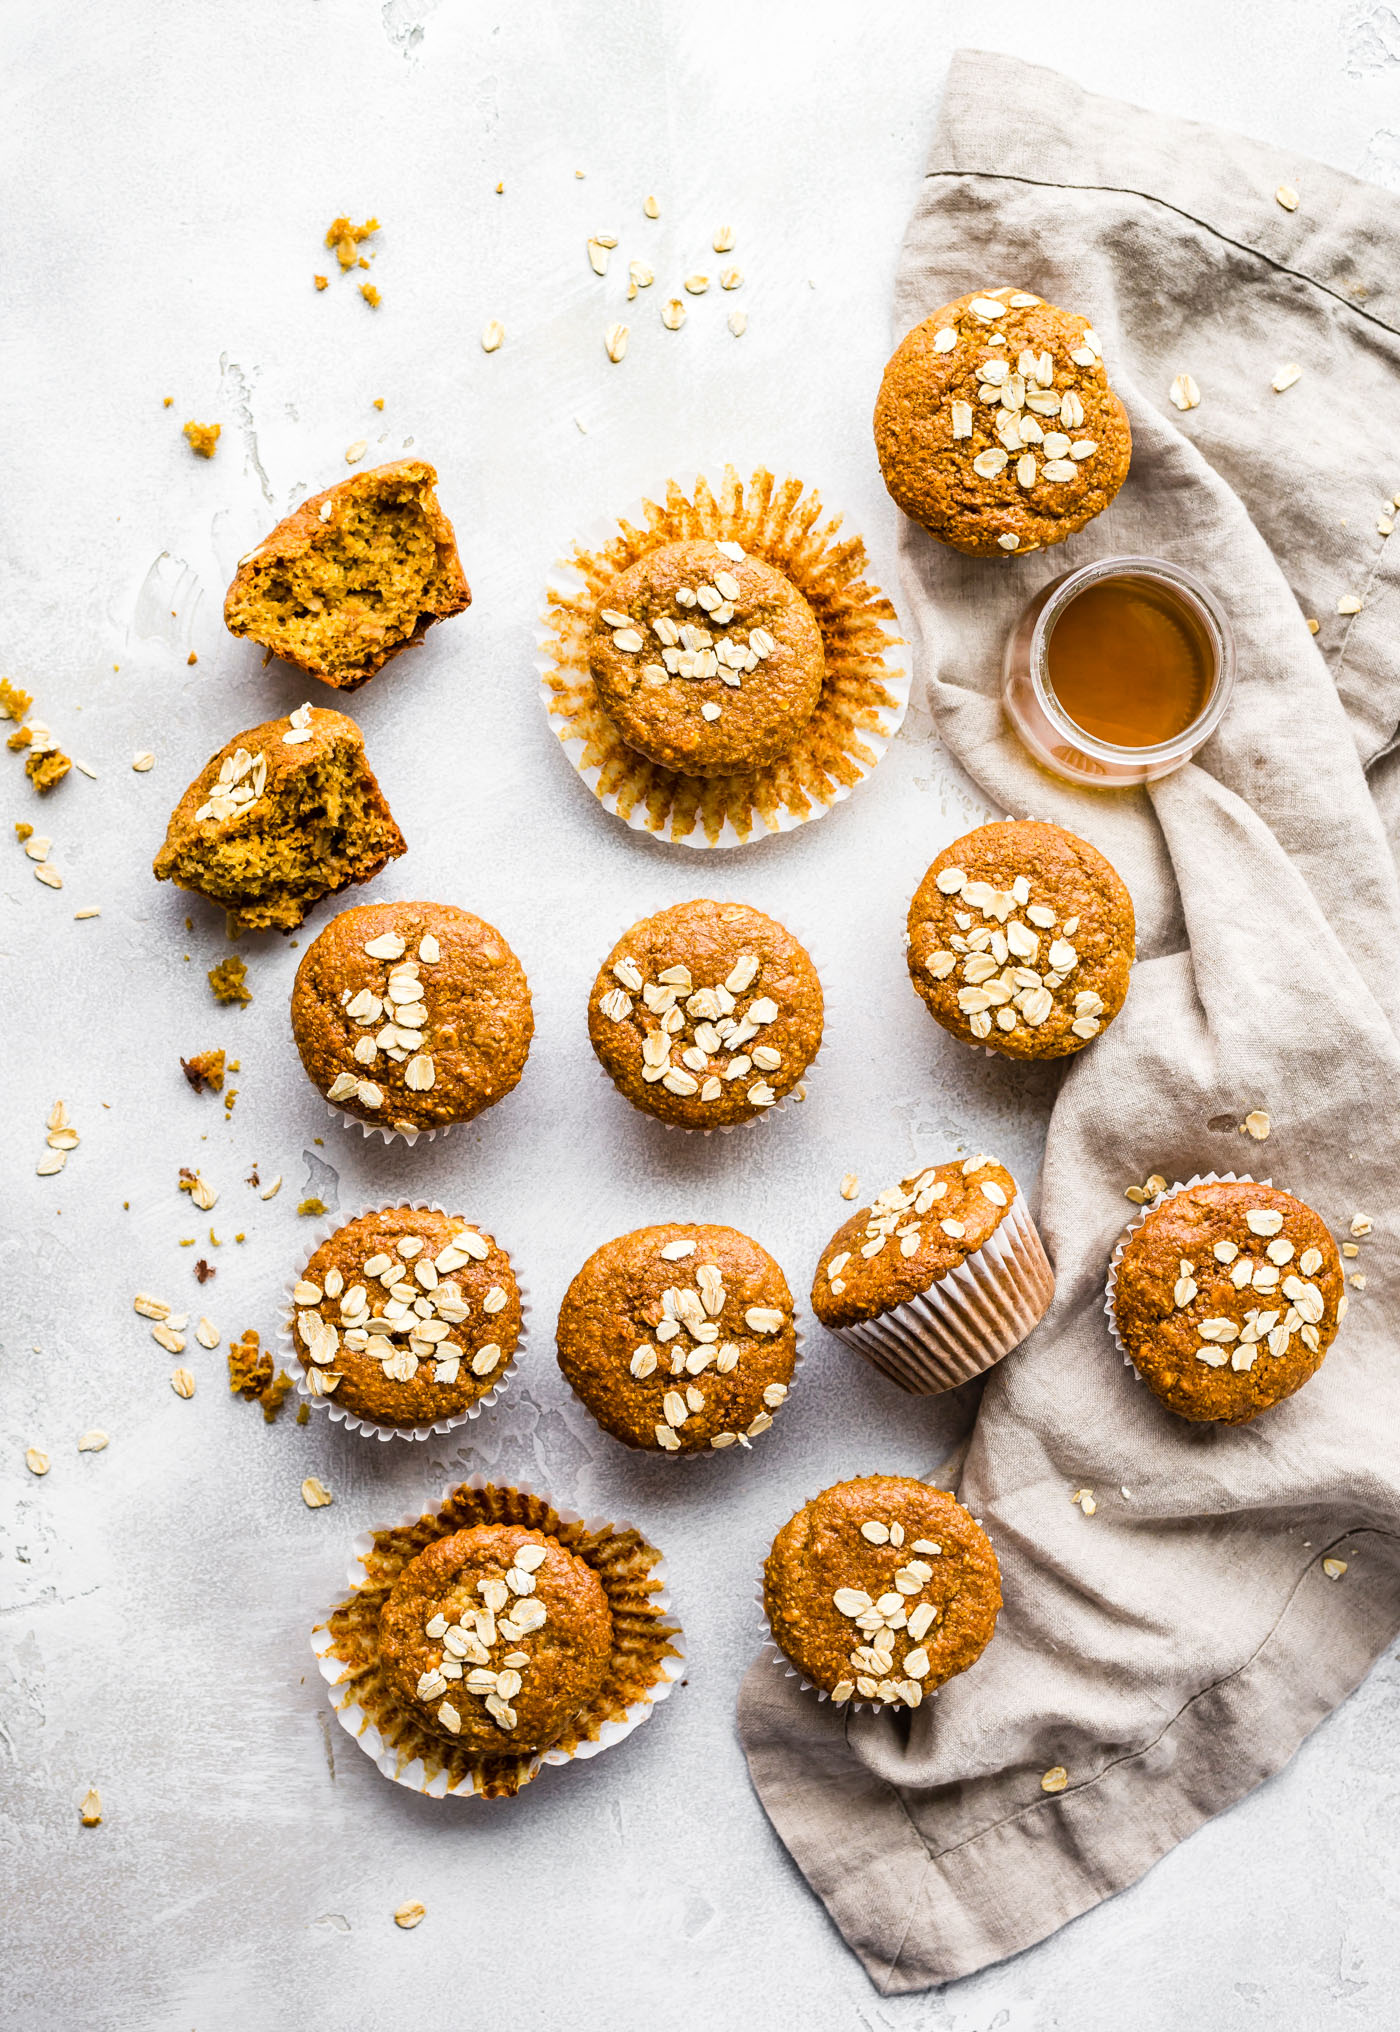 These Flourless Honey Oat Ricotta Muffins are easy to make for a healthy breakfast or snack! A Gluten-free Ricotta Muffins recipe that's honey sweetened and rich in protein, fiber, and calcium. Flourless baking made quick and simple